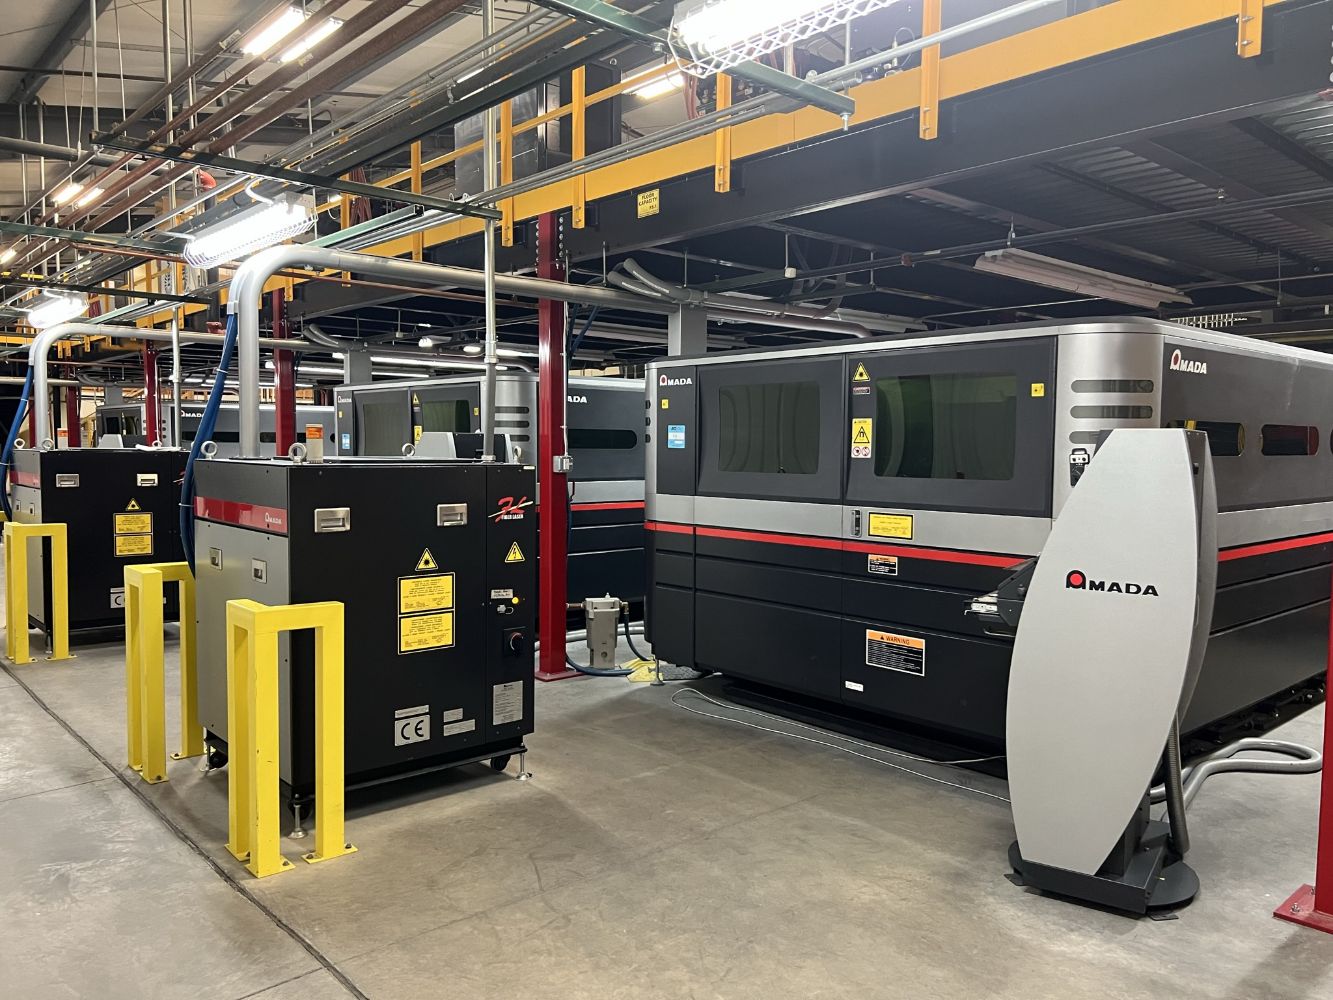 LATE-MODEL AMADA CNC FIBER LASER FACILITY - Surplus to the Ongoing Operations of a Major Semiconductor Company